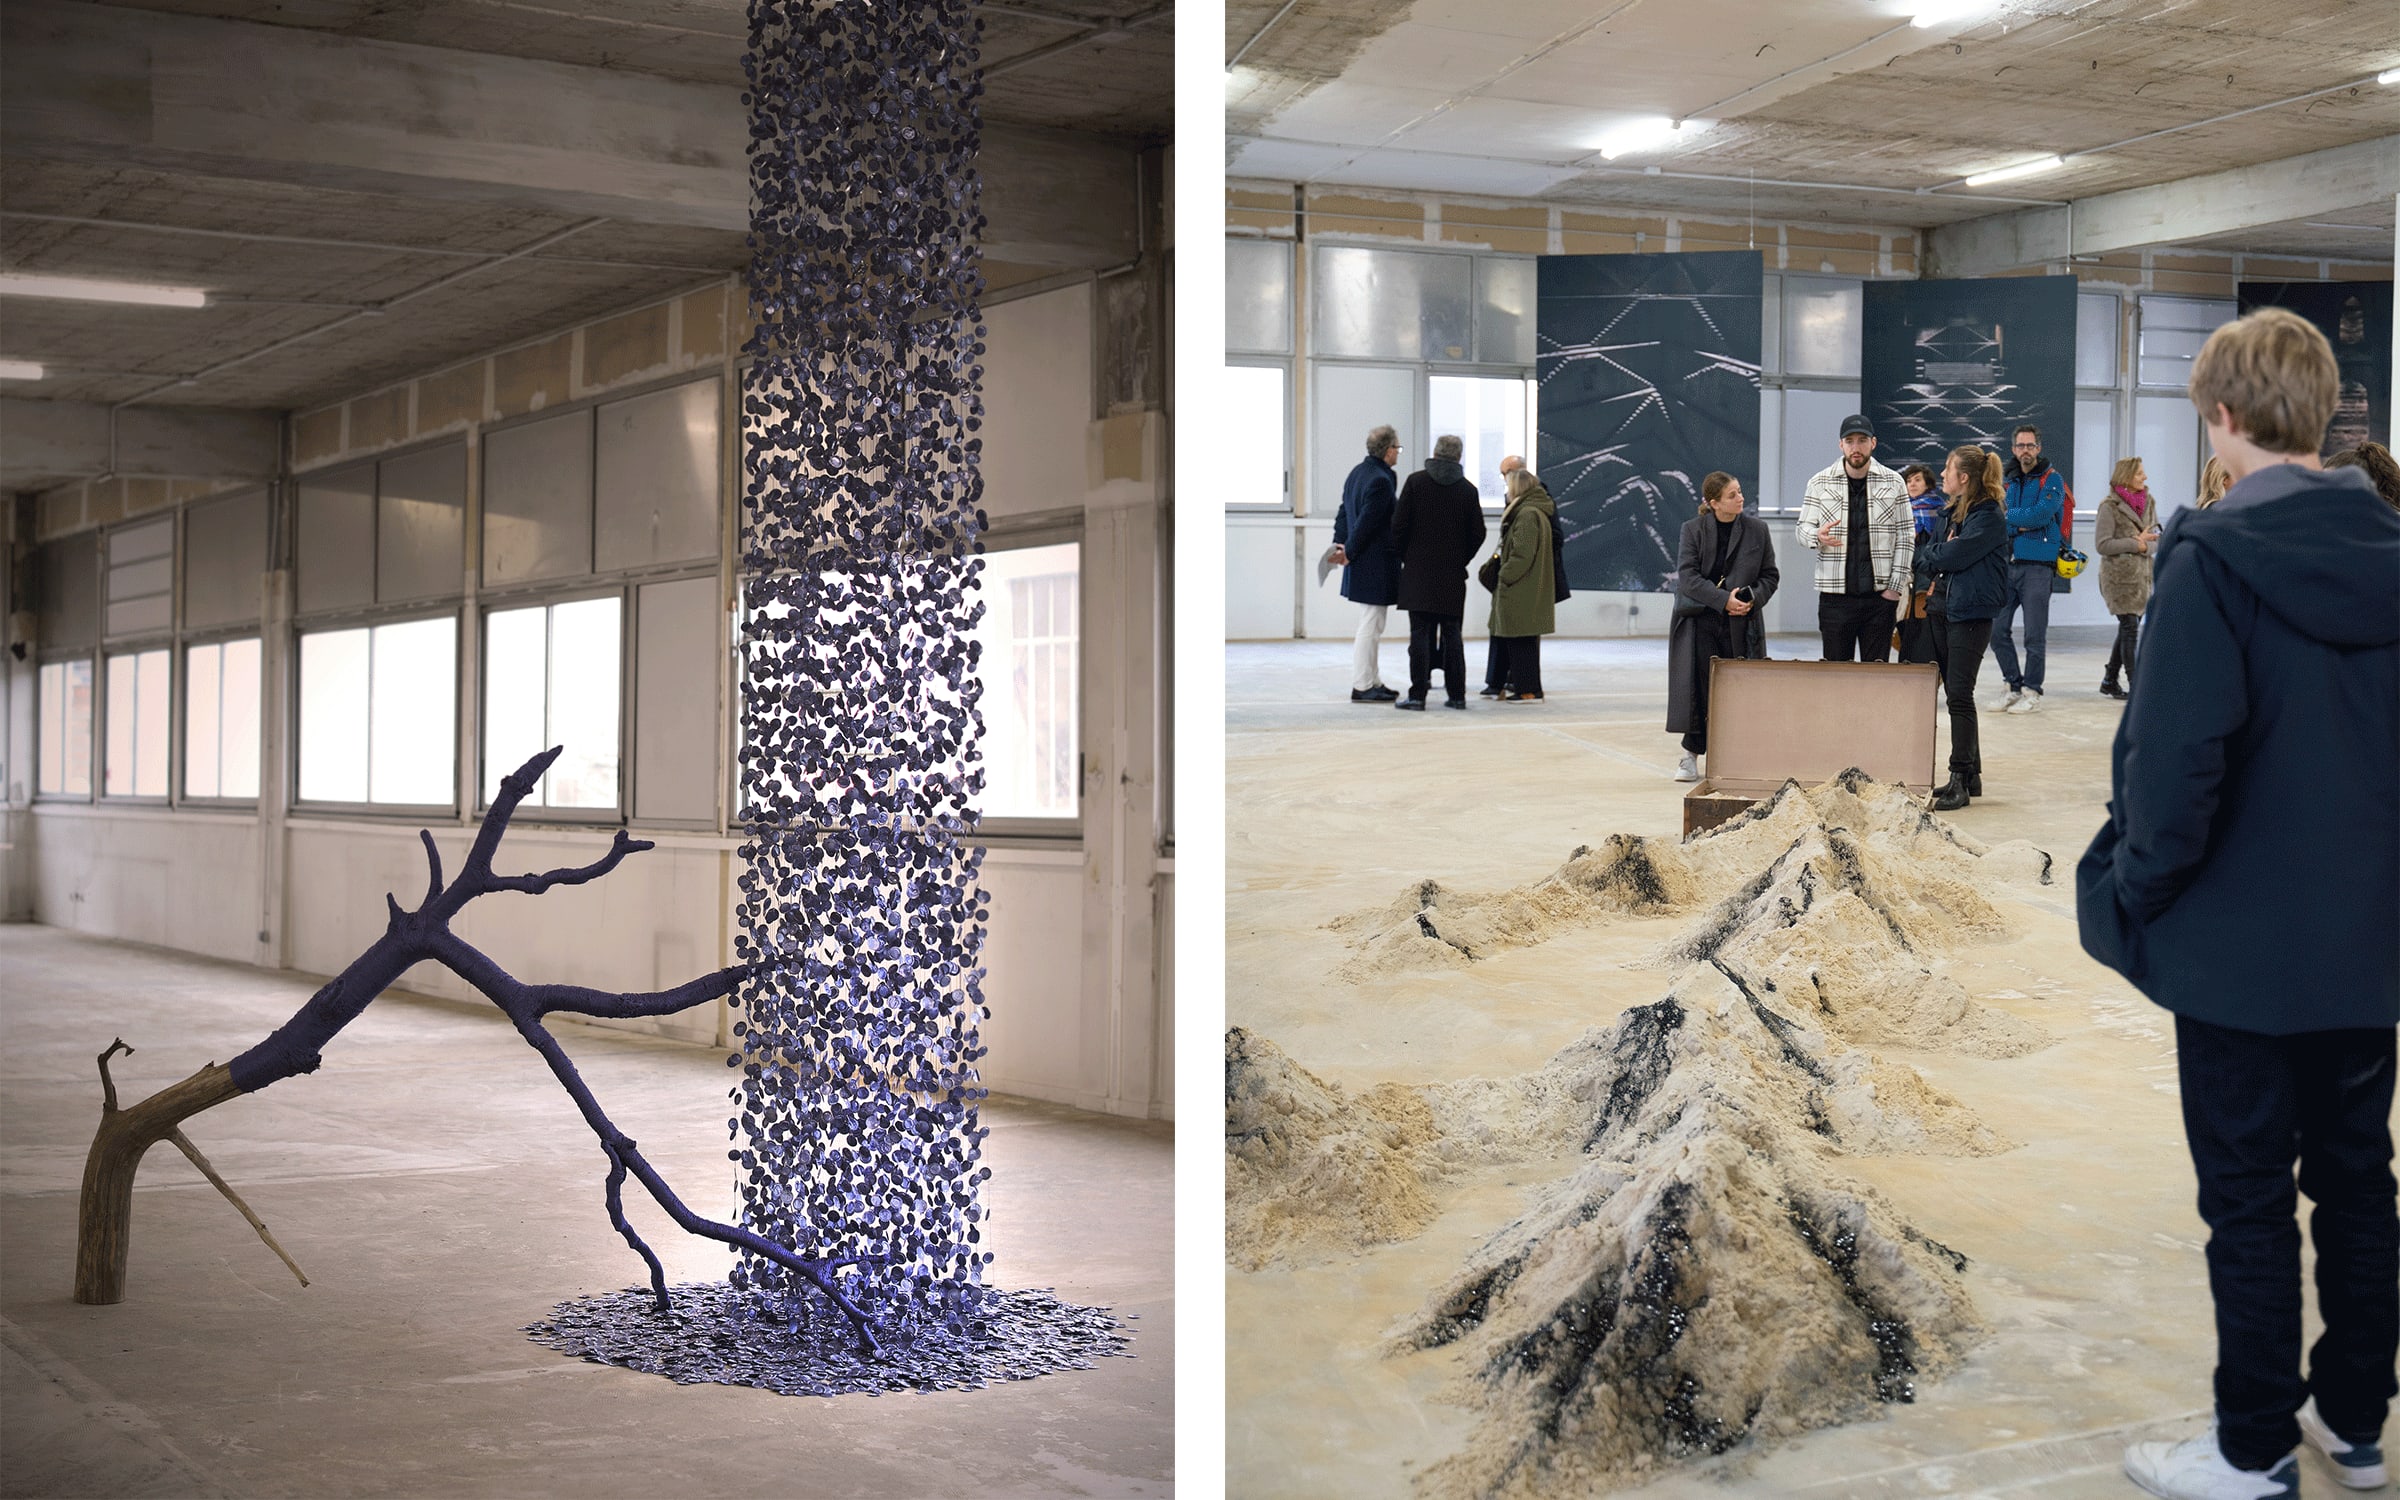 Left: Installation view of Camila Rodriguez Triana’s artworks, Poush, Aubervilliers. Courtesy of the artist and Poush. Right: Installation view of Ismaël Bazri’s artworks, Poush, Aubervilliers, 2023. Courtesy of the artist and Poush.